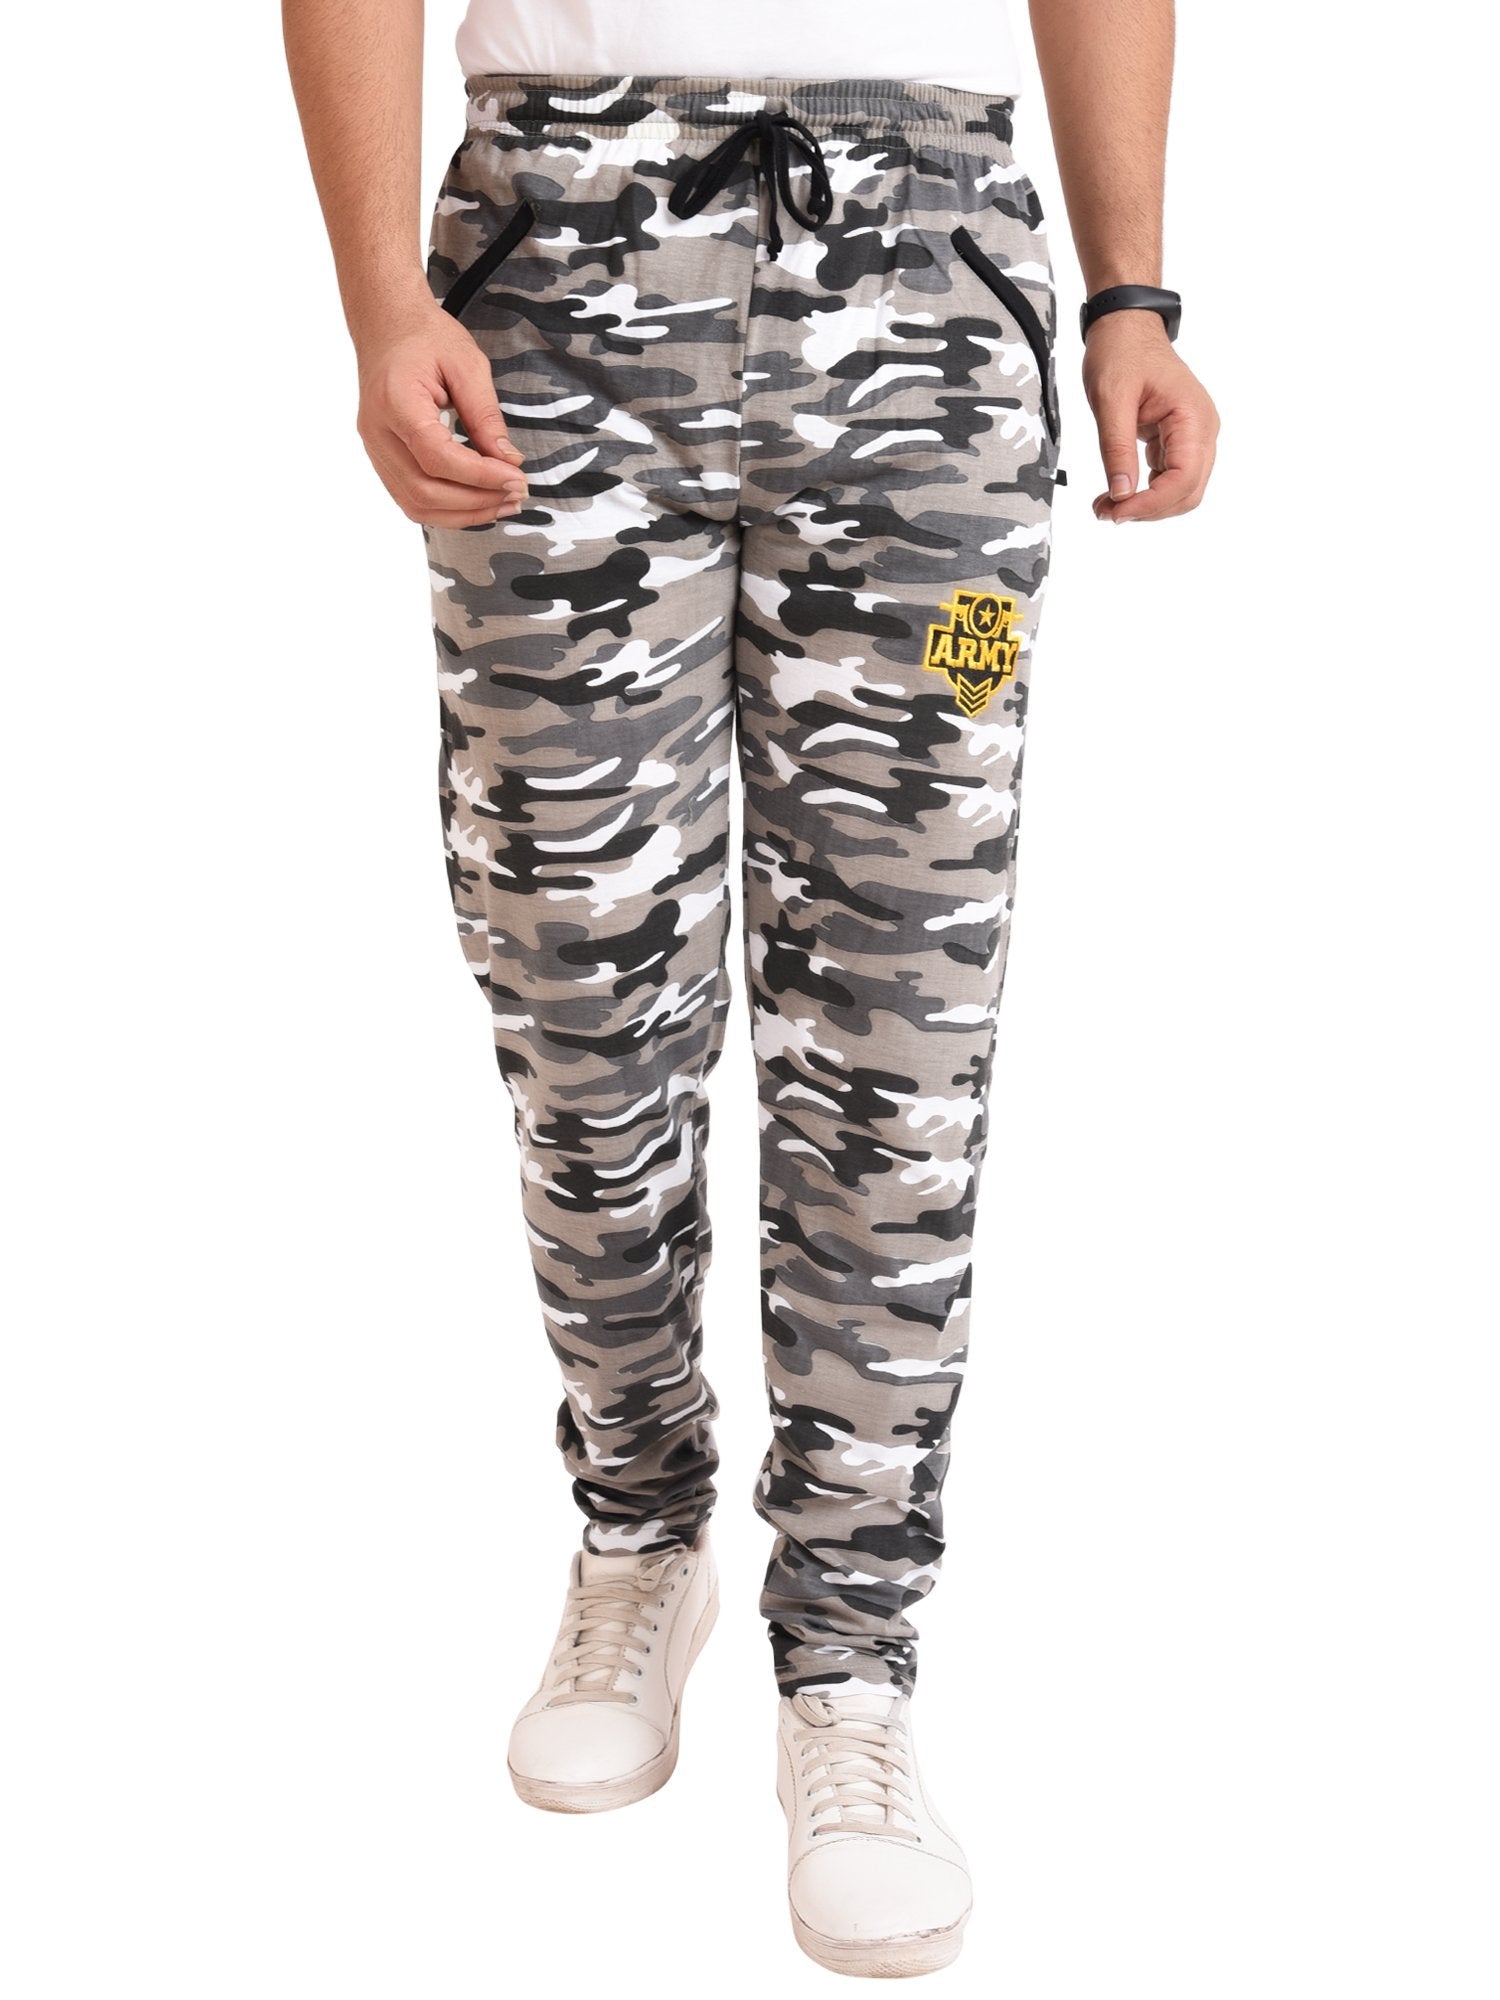 Shop Camo Cargo Joggers for Men from latest collection at Forever 21   430709